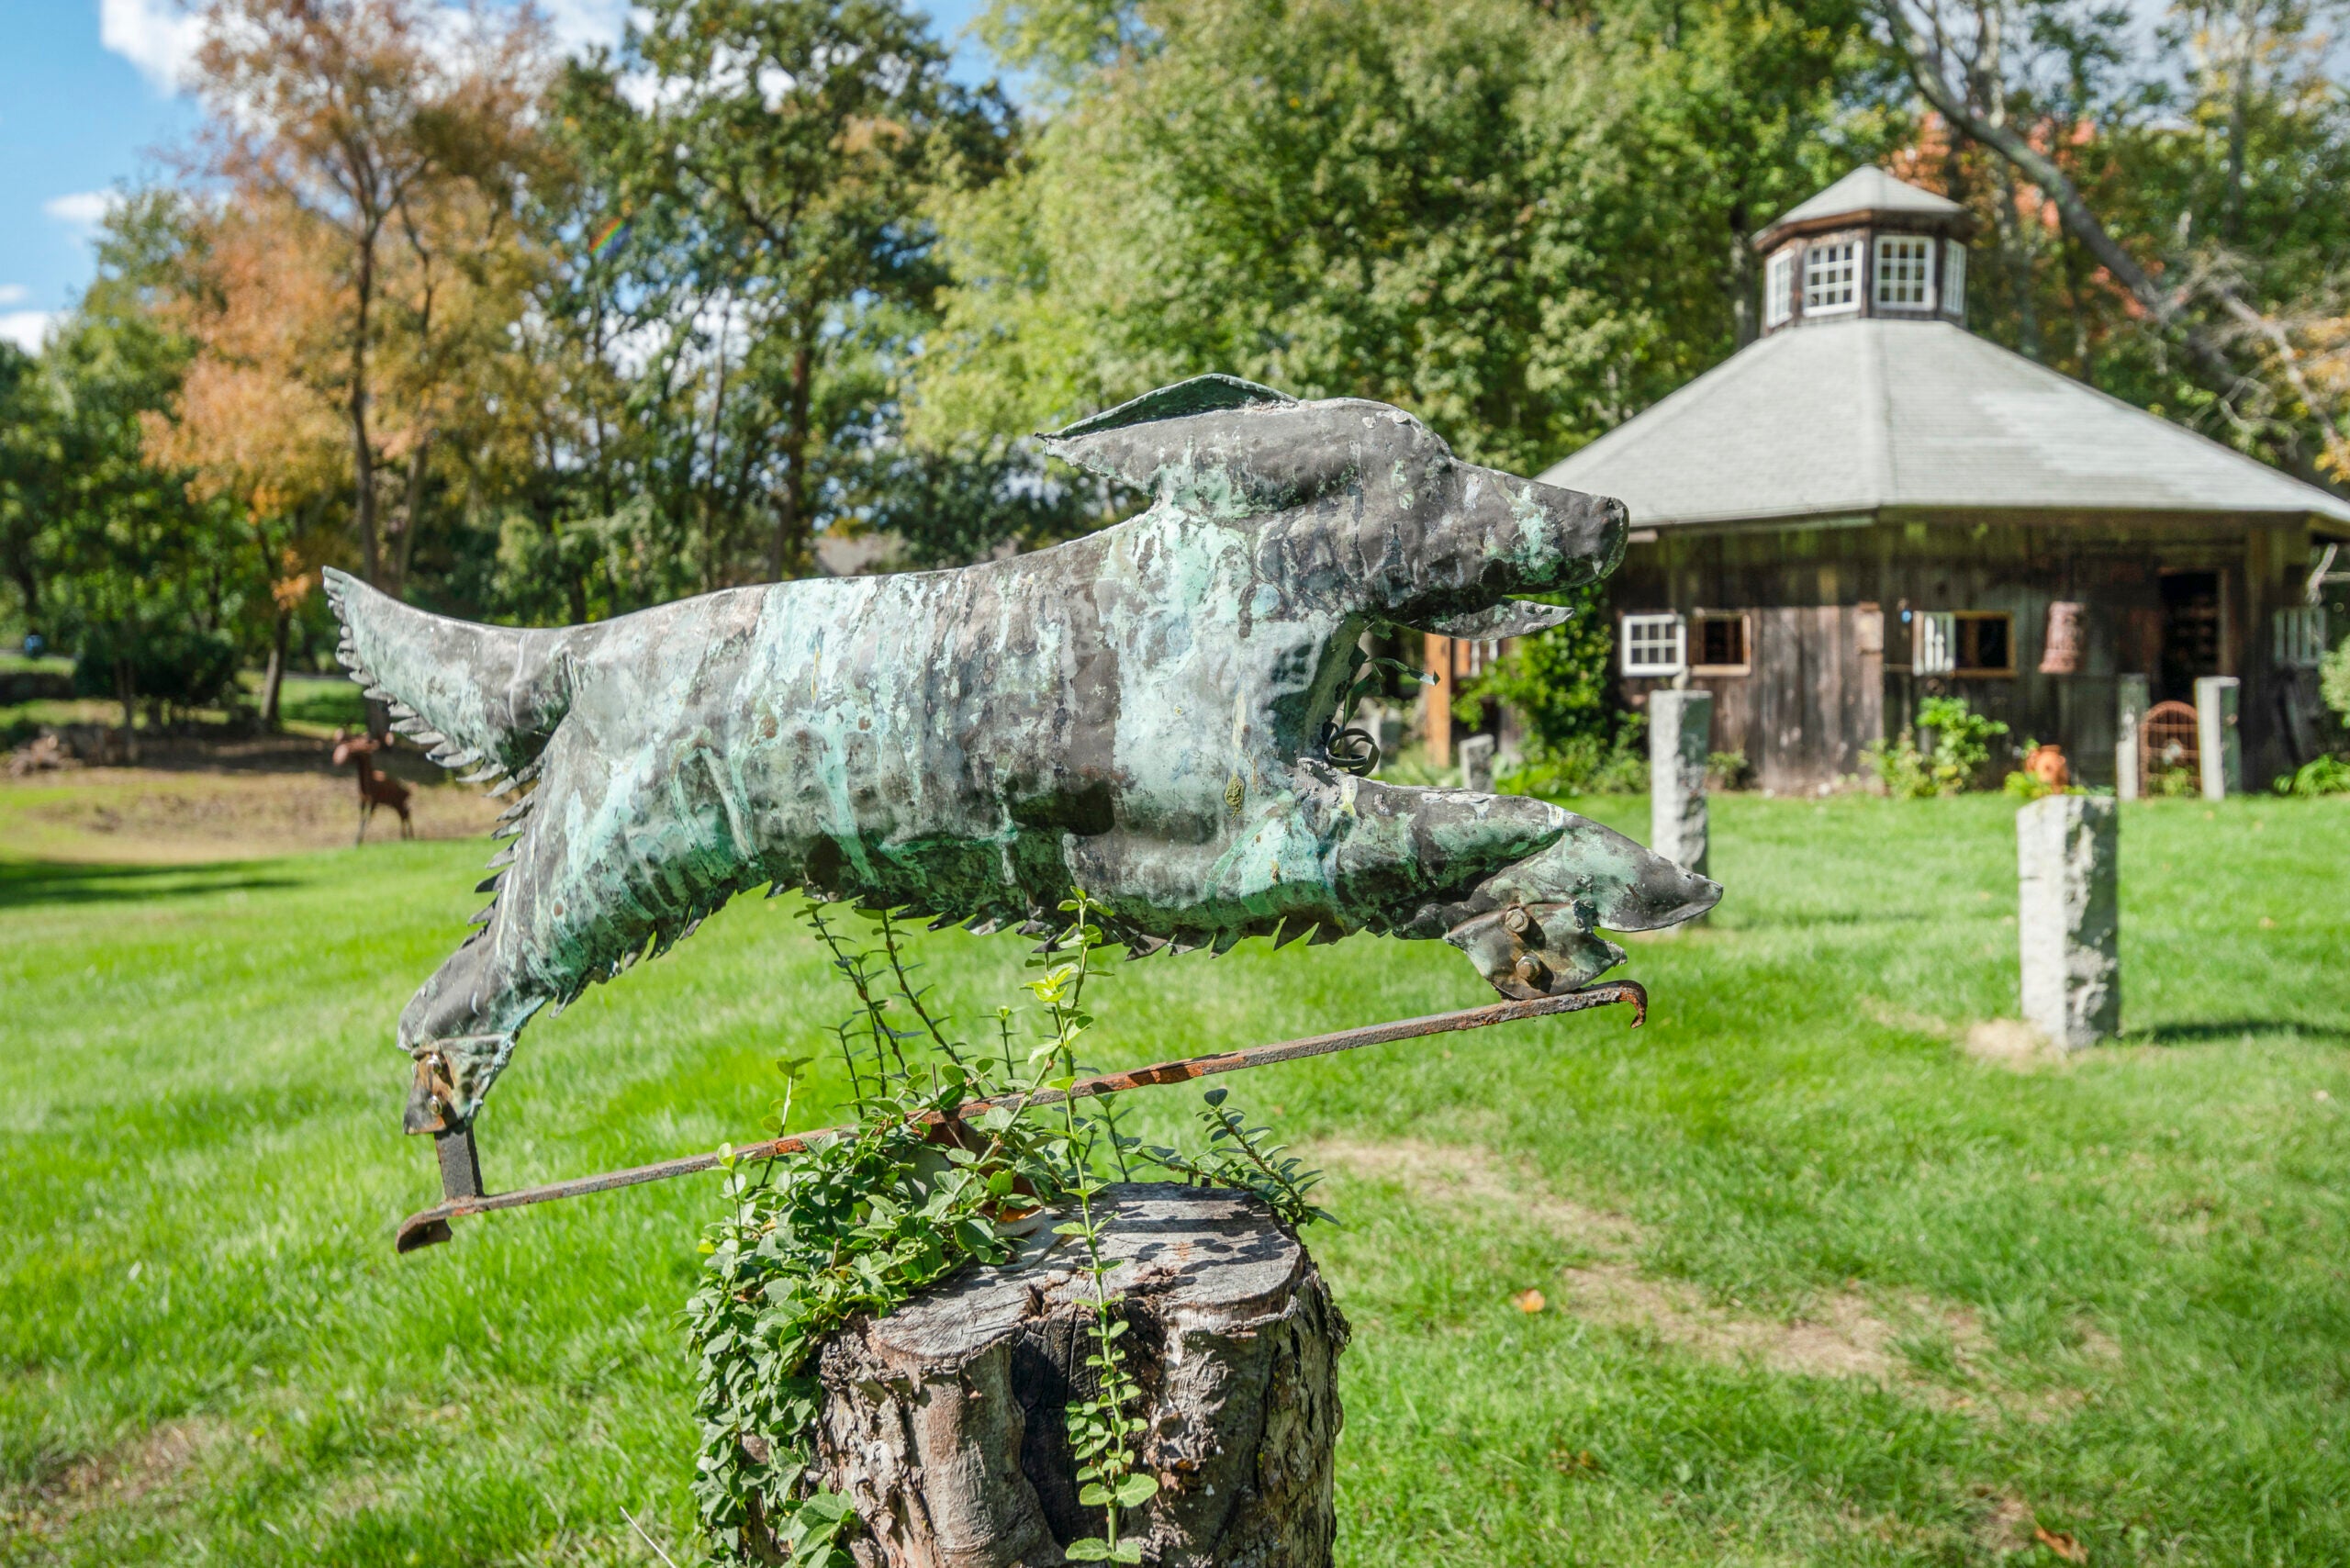 A copper statue shaped like a running dog on a tree stump in front of an octagonal barn.